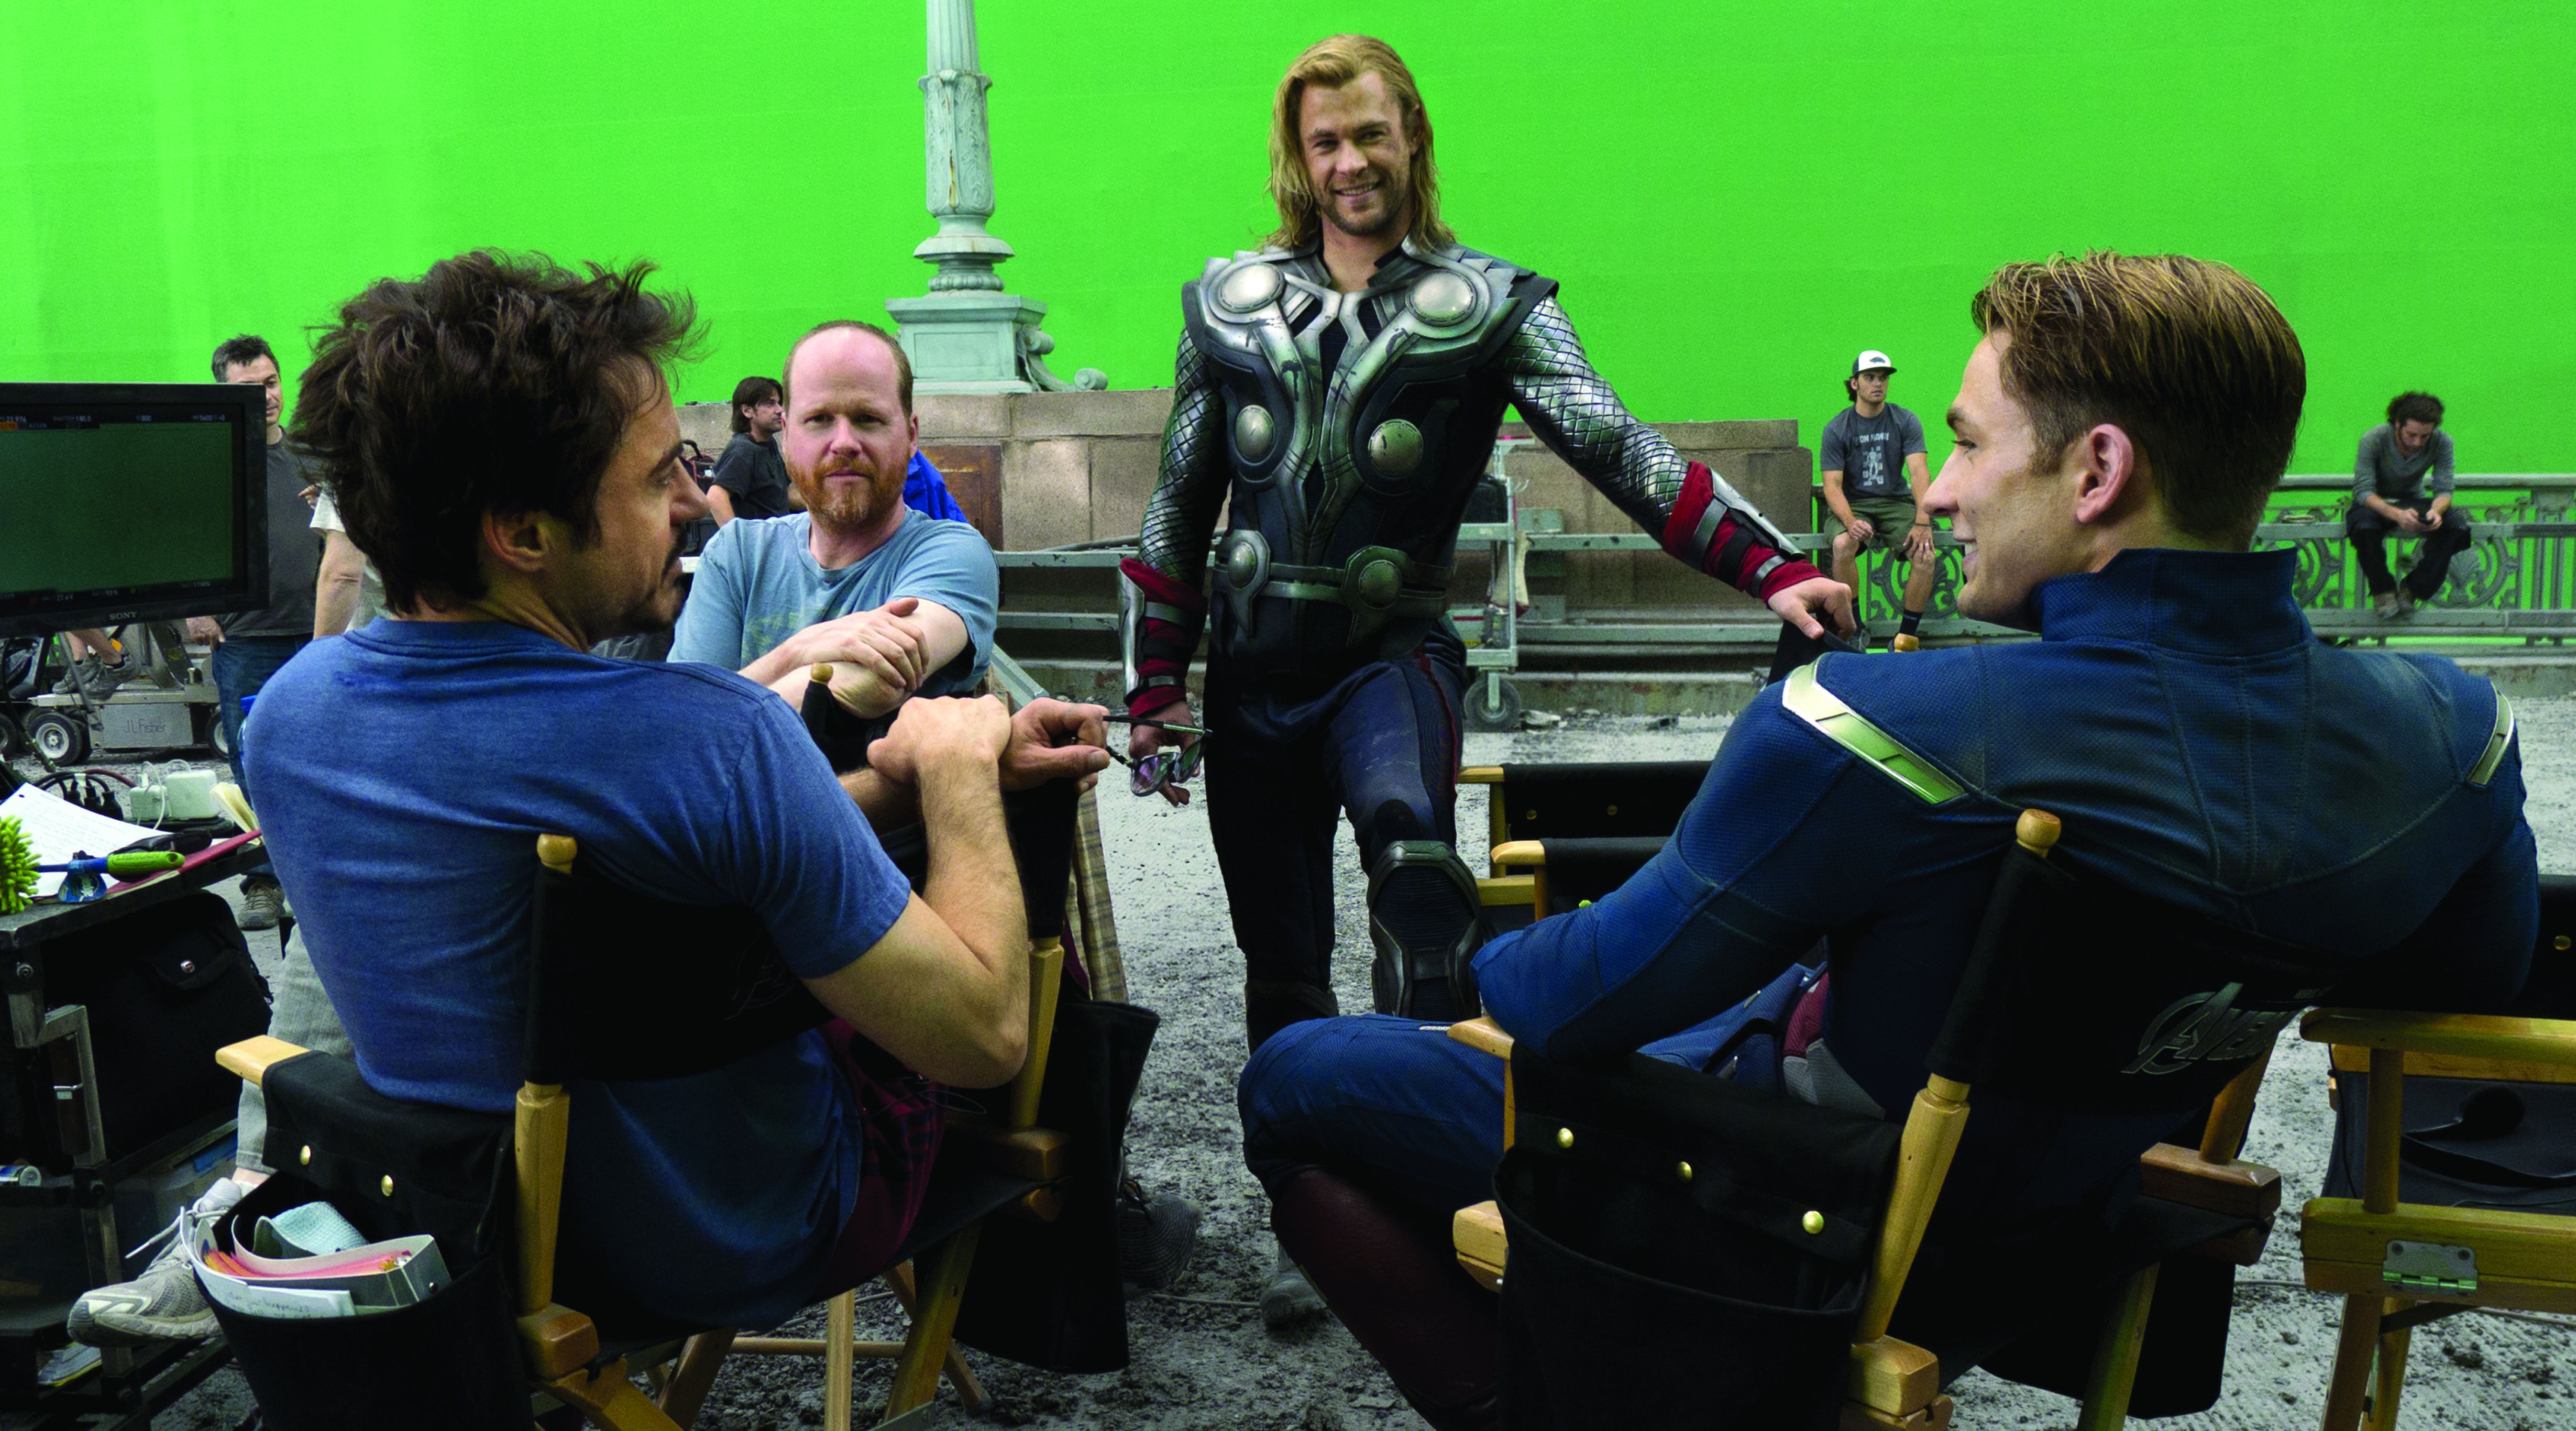 The Avengers cast and crew behind the scenes, green screen a